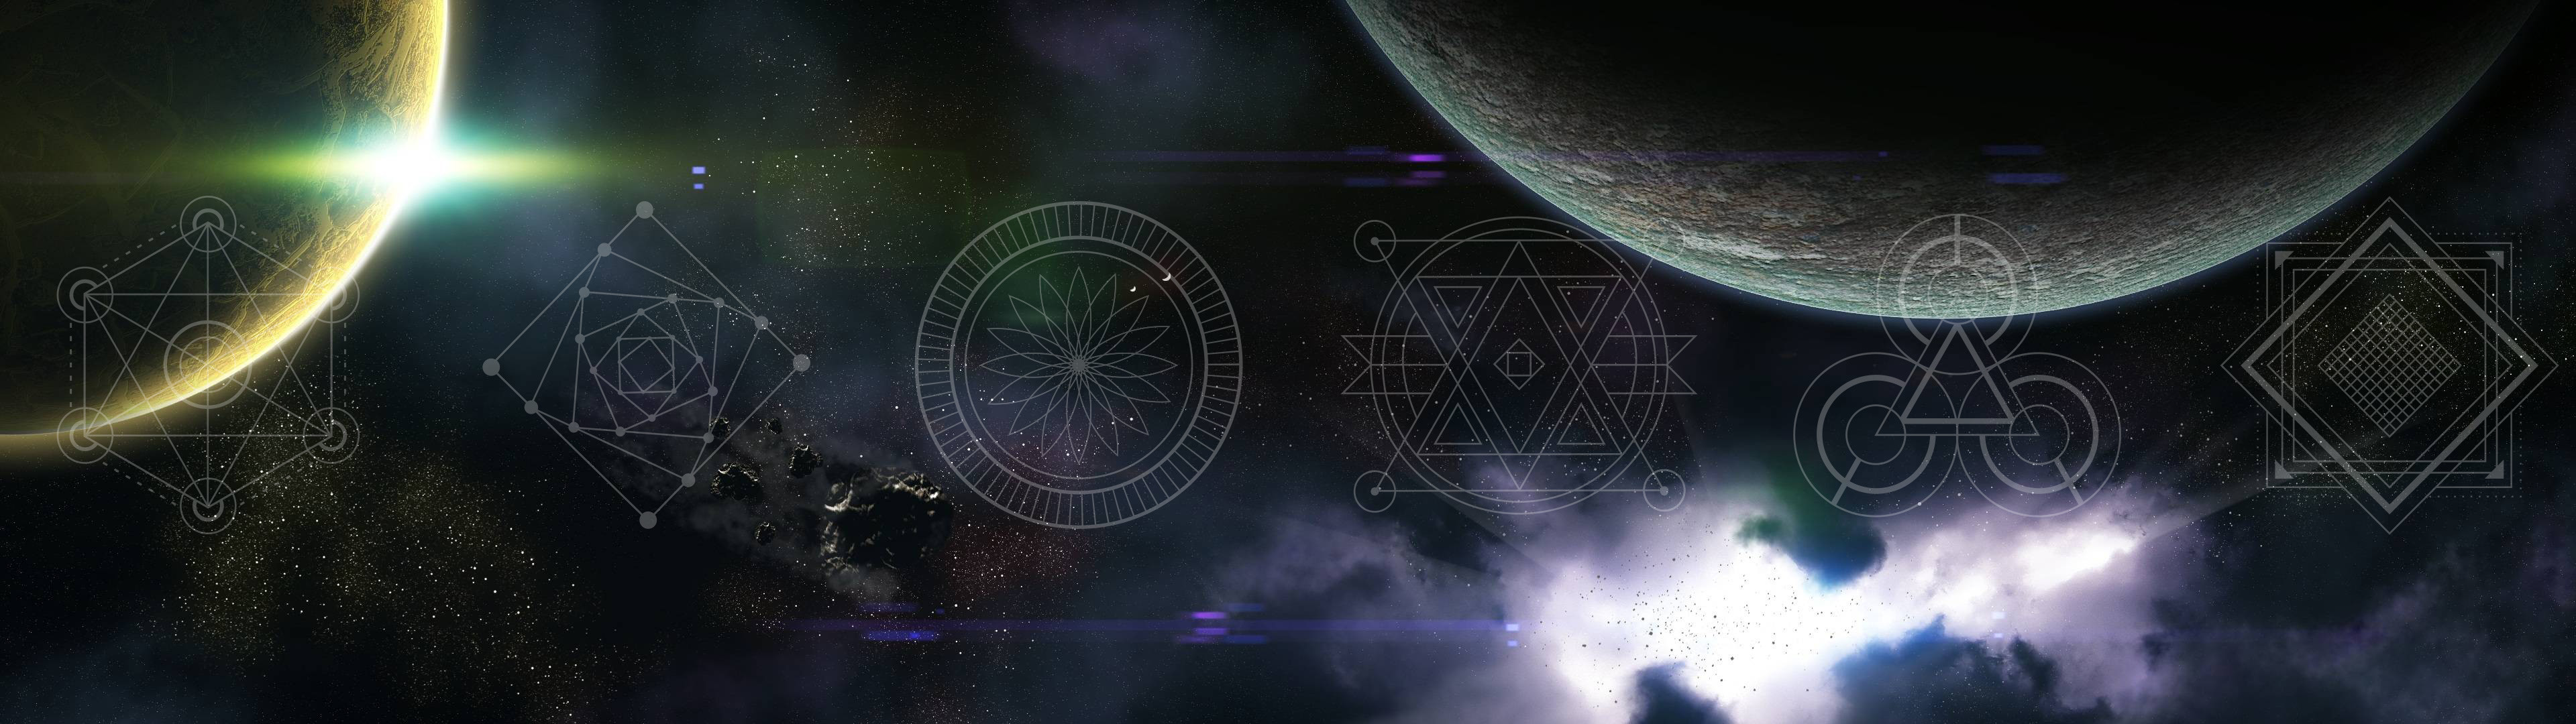 3840x1080 Sacred geometry and space wallpapers (part1)